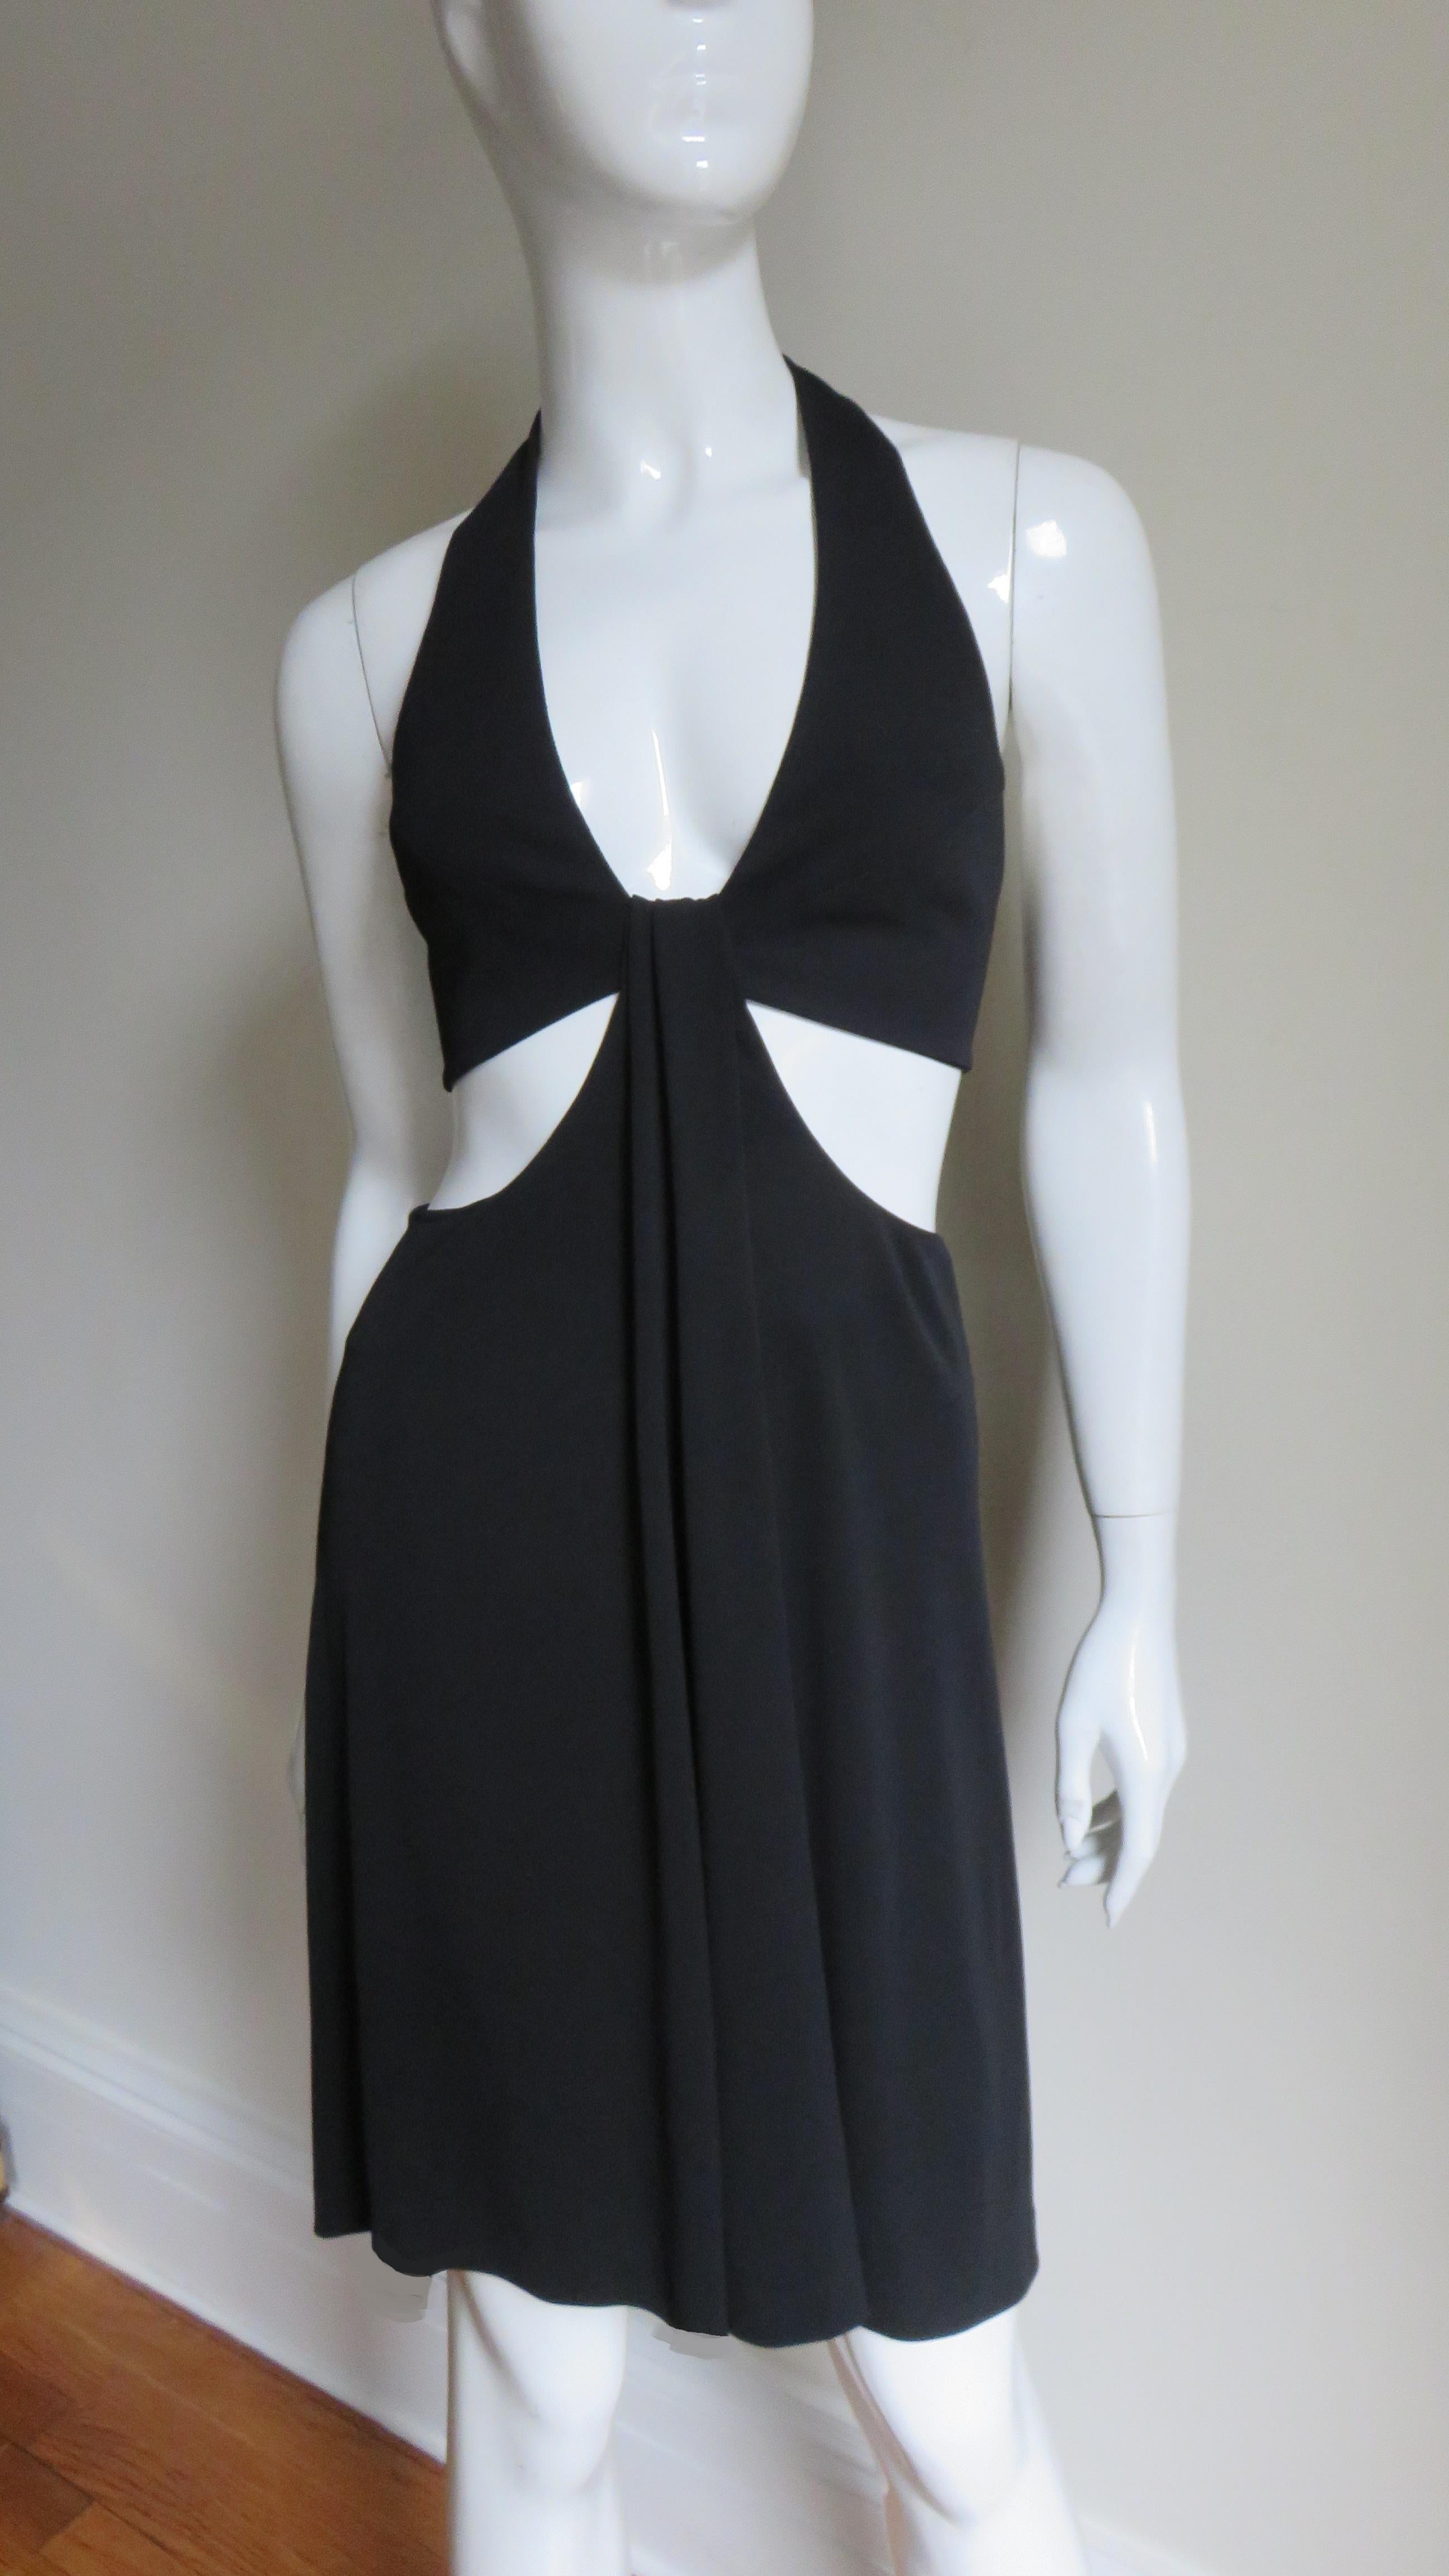 A gorgeous black jersey dress by Herve Leger. A master of enhancing the female form this dress is no exception with it's plunging halter neckline plus exposed back and side waist. The back of the dress is bare to just below the waist with the